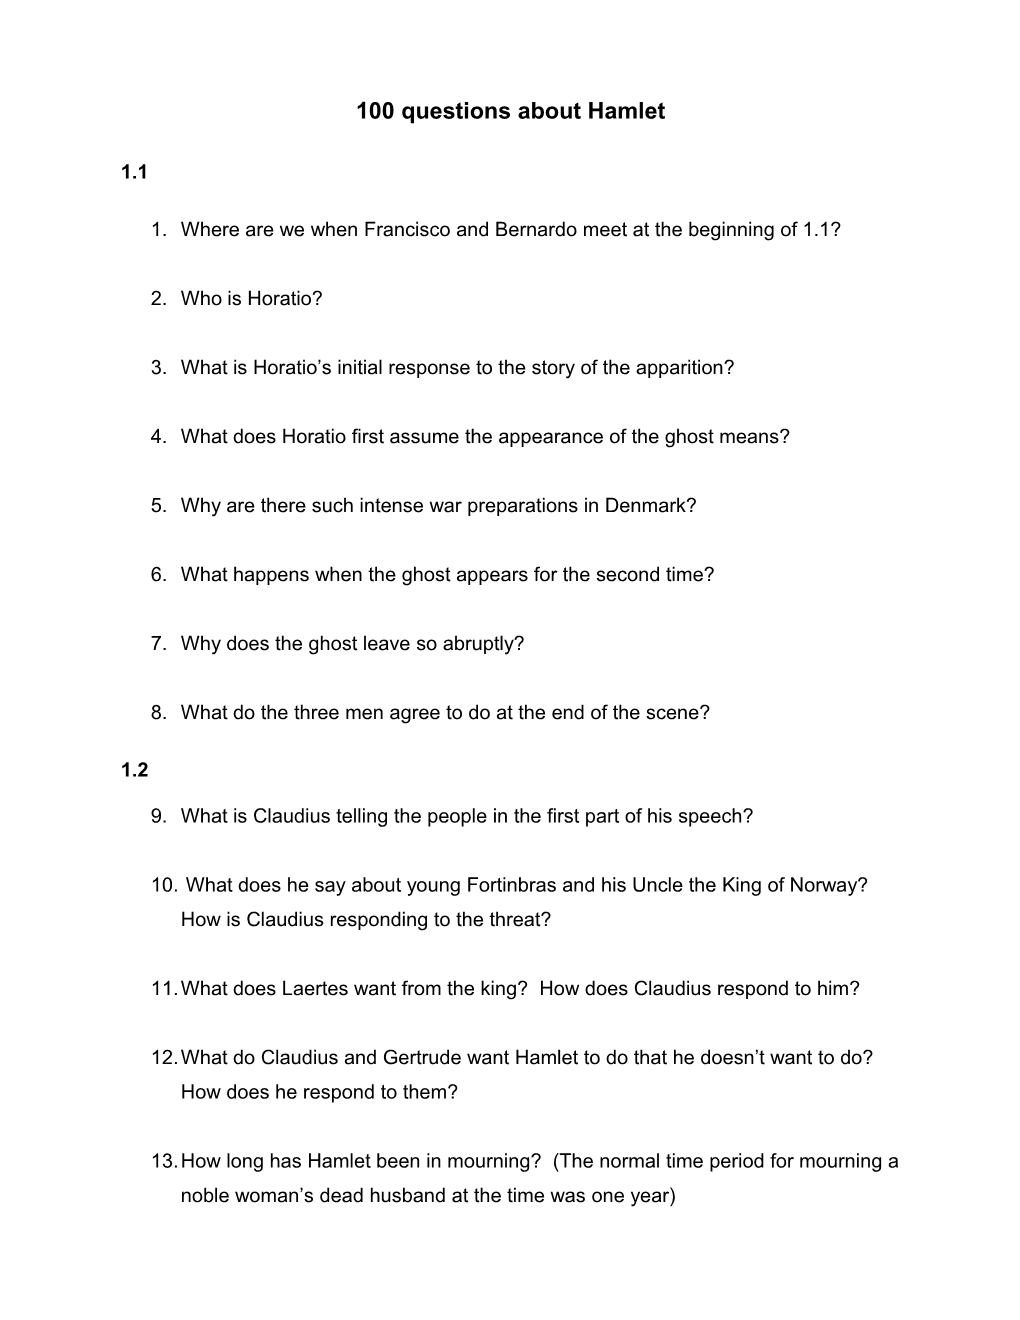 Hamlet Study Guide Questions